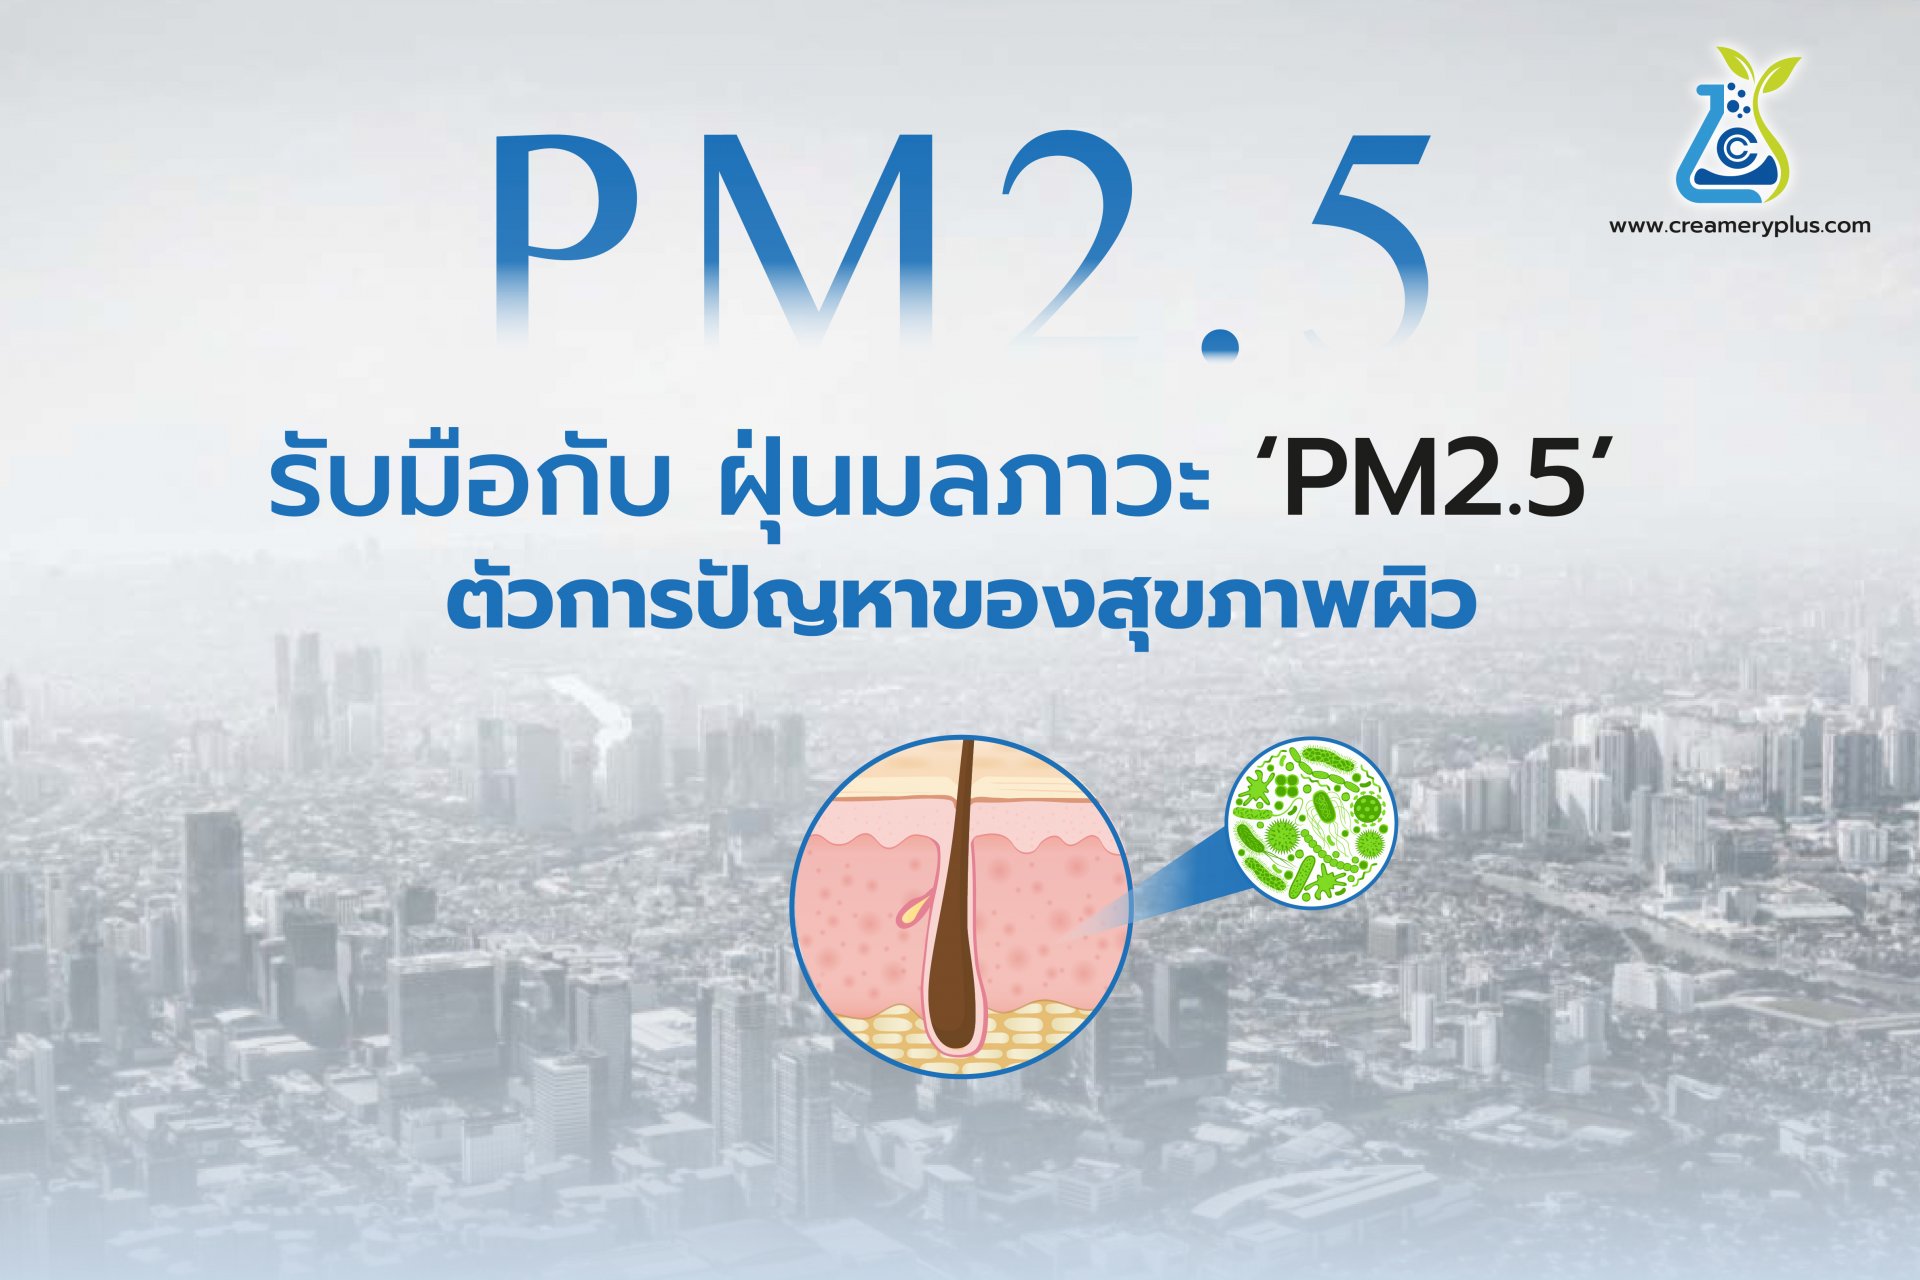 PM2.5 air pollution, the cause of skin health problems